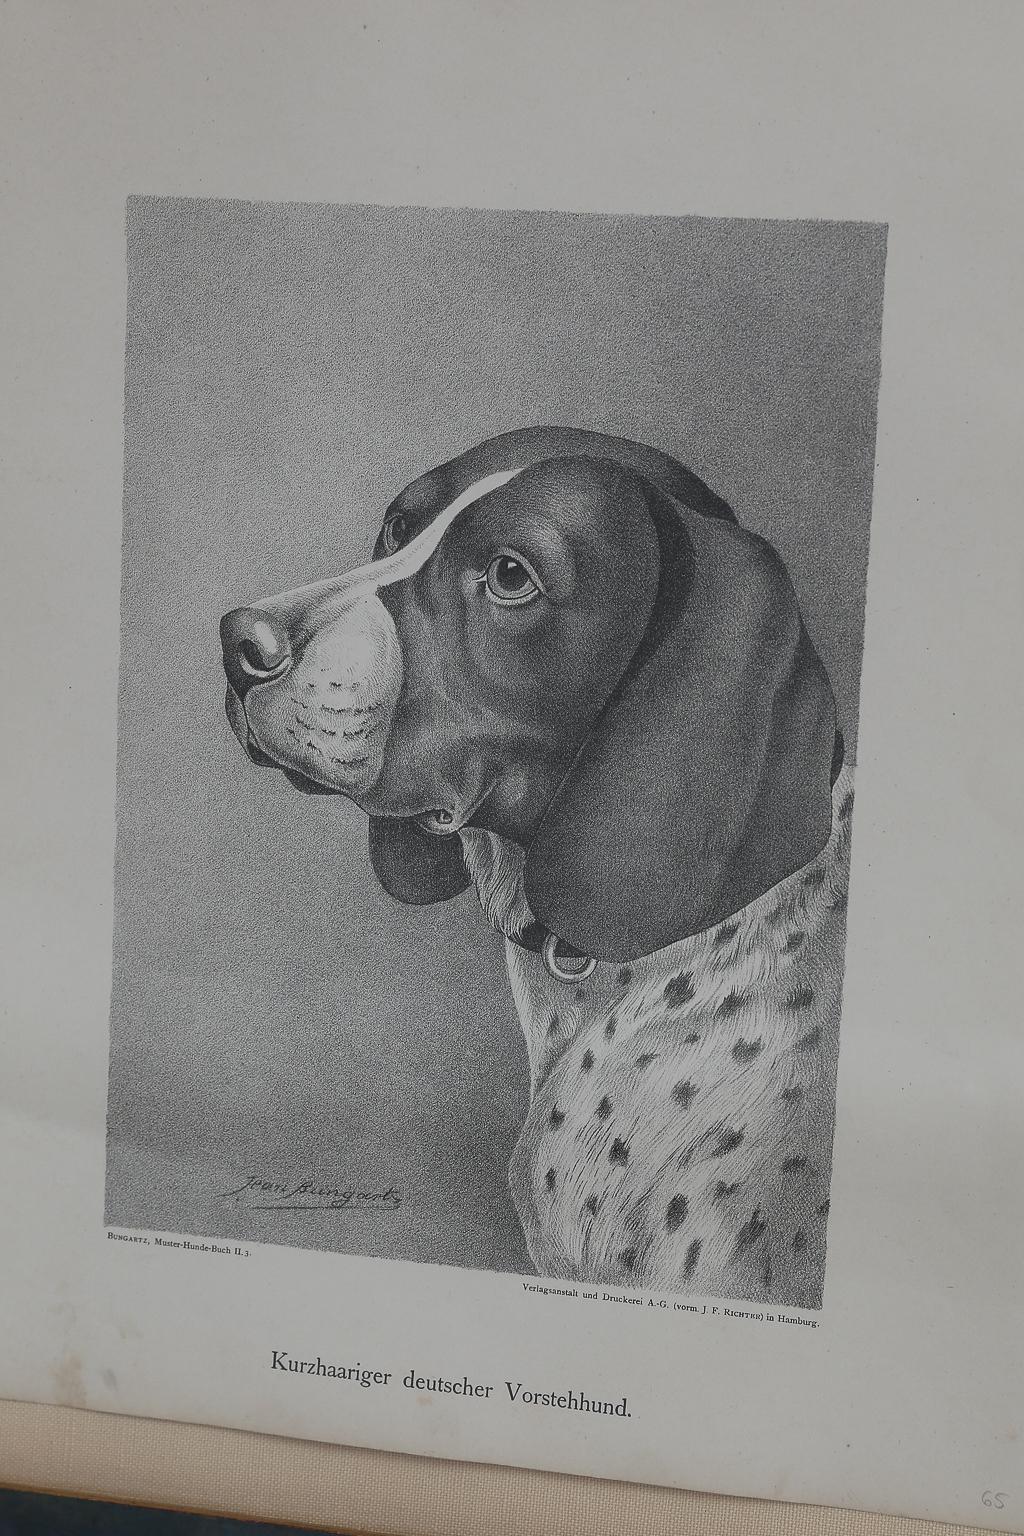 Antique, dog engravings from a portfolio of drawings by a German artist, Jean Bungartz, published in 1890. If you own one of these dogs, you will absolutely love these engravings. Each of these prints come with a description of the dog in German. It